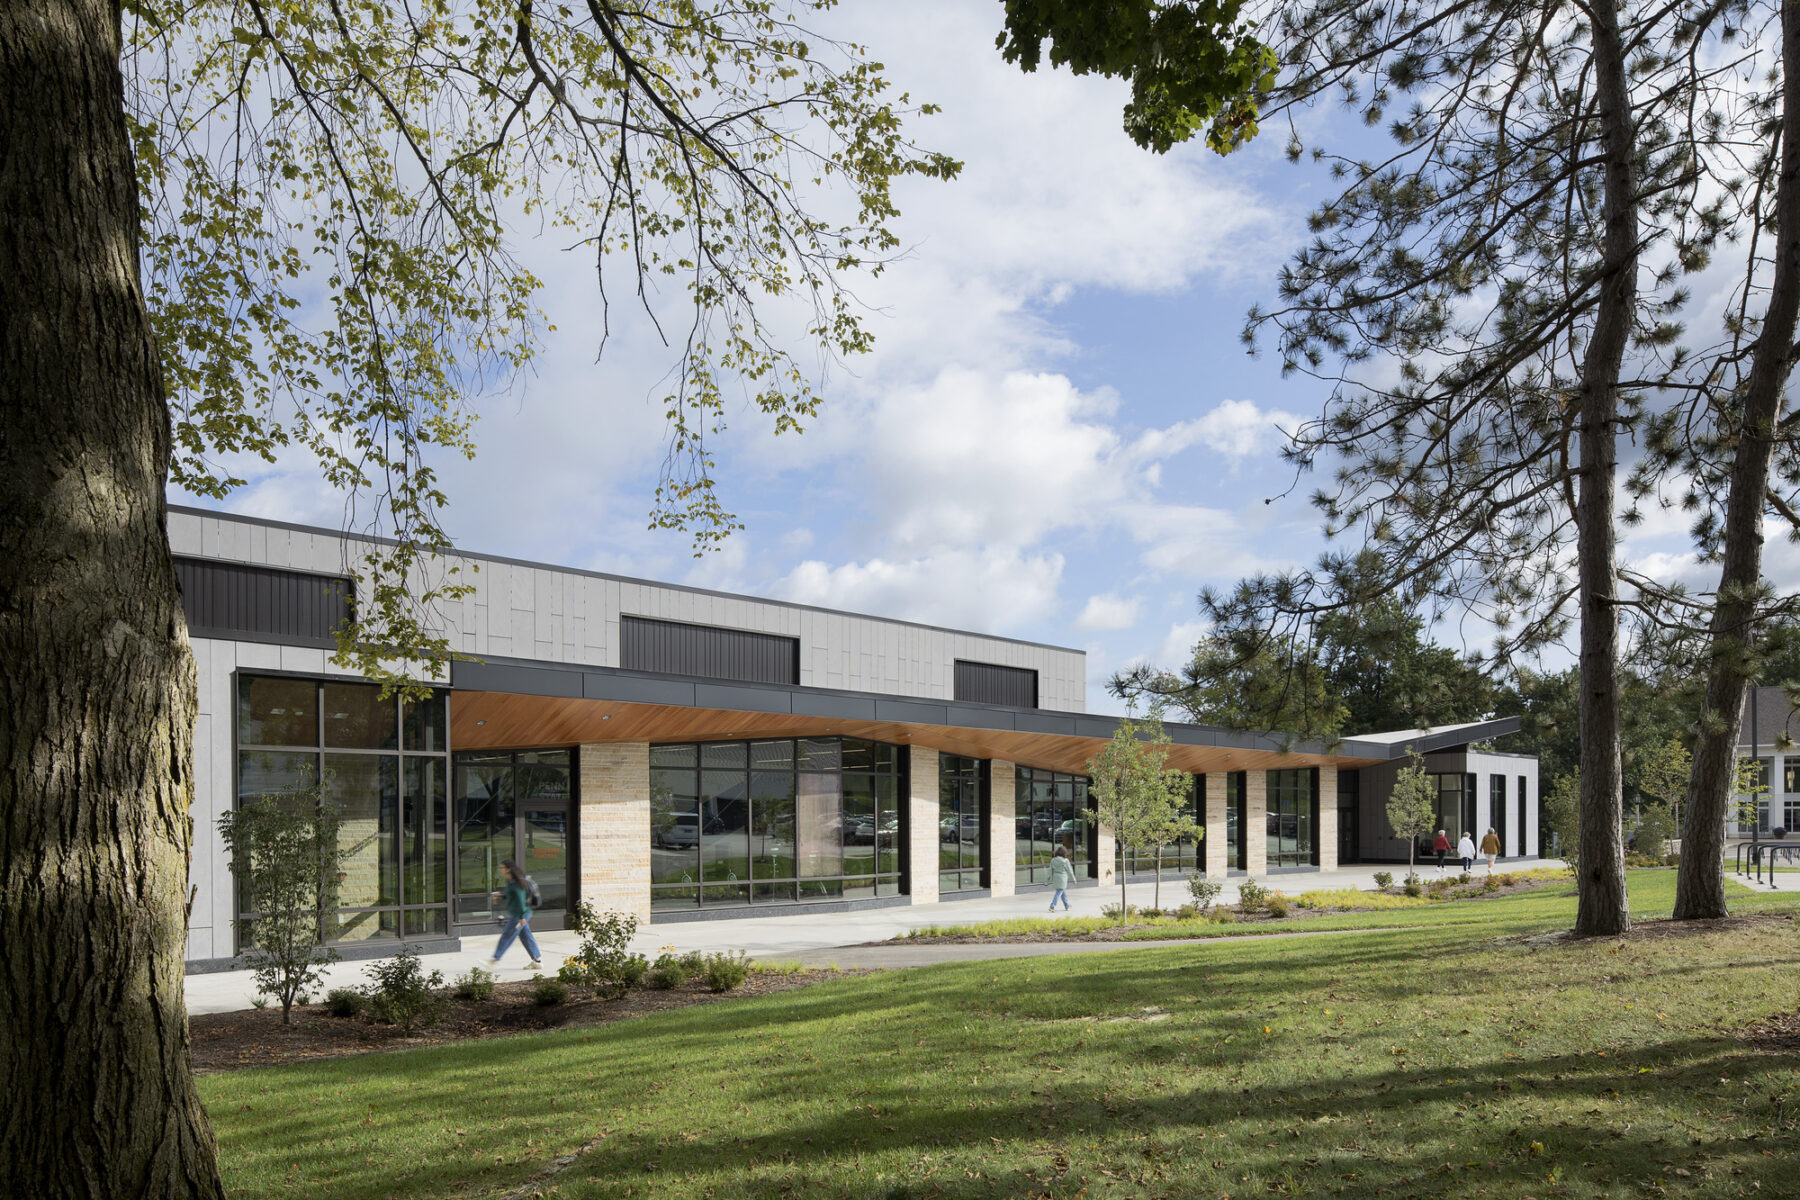 exterior daytime photograph of recreation center, with trees framing the view. People walking by the building